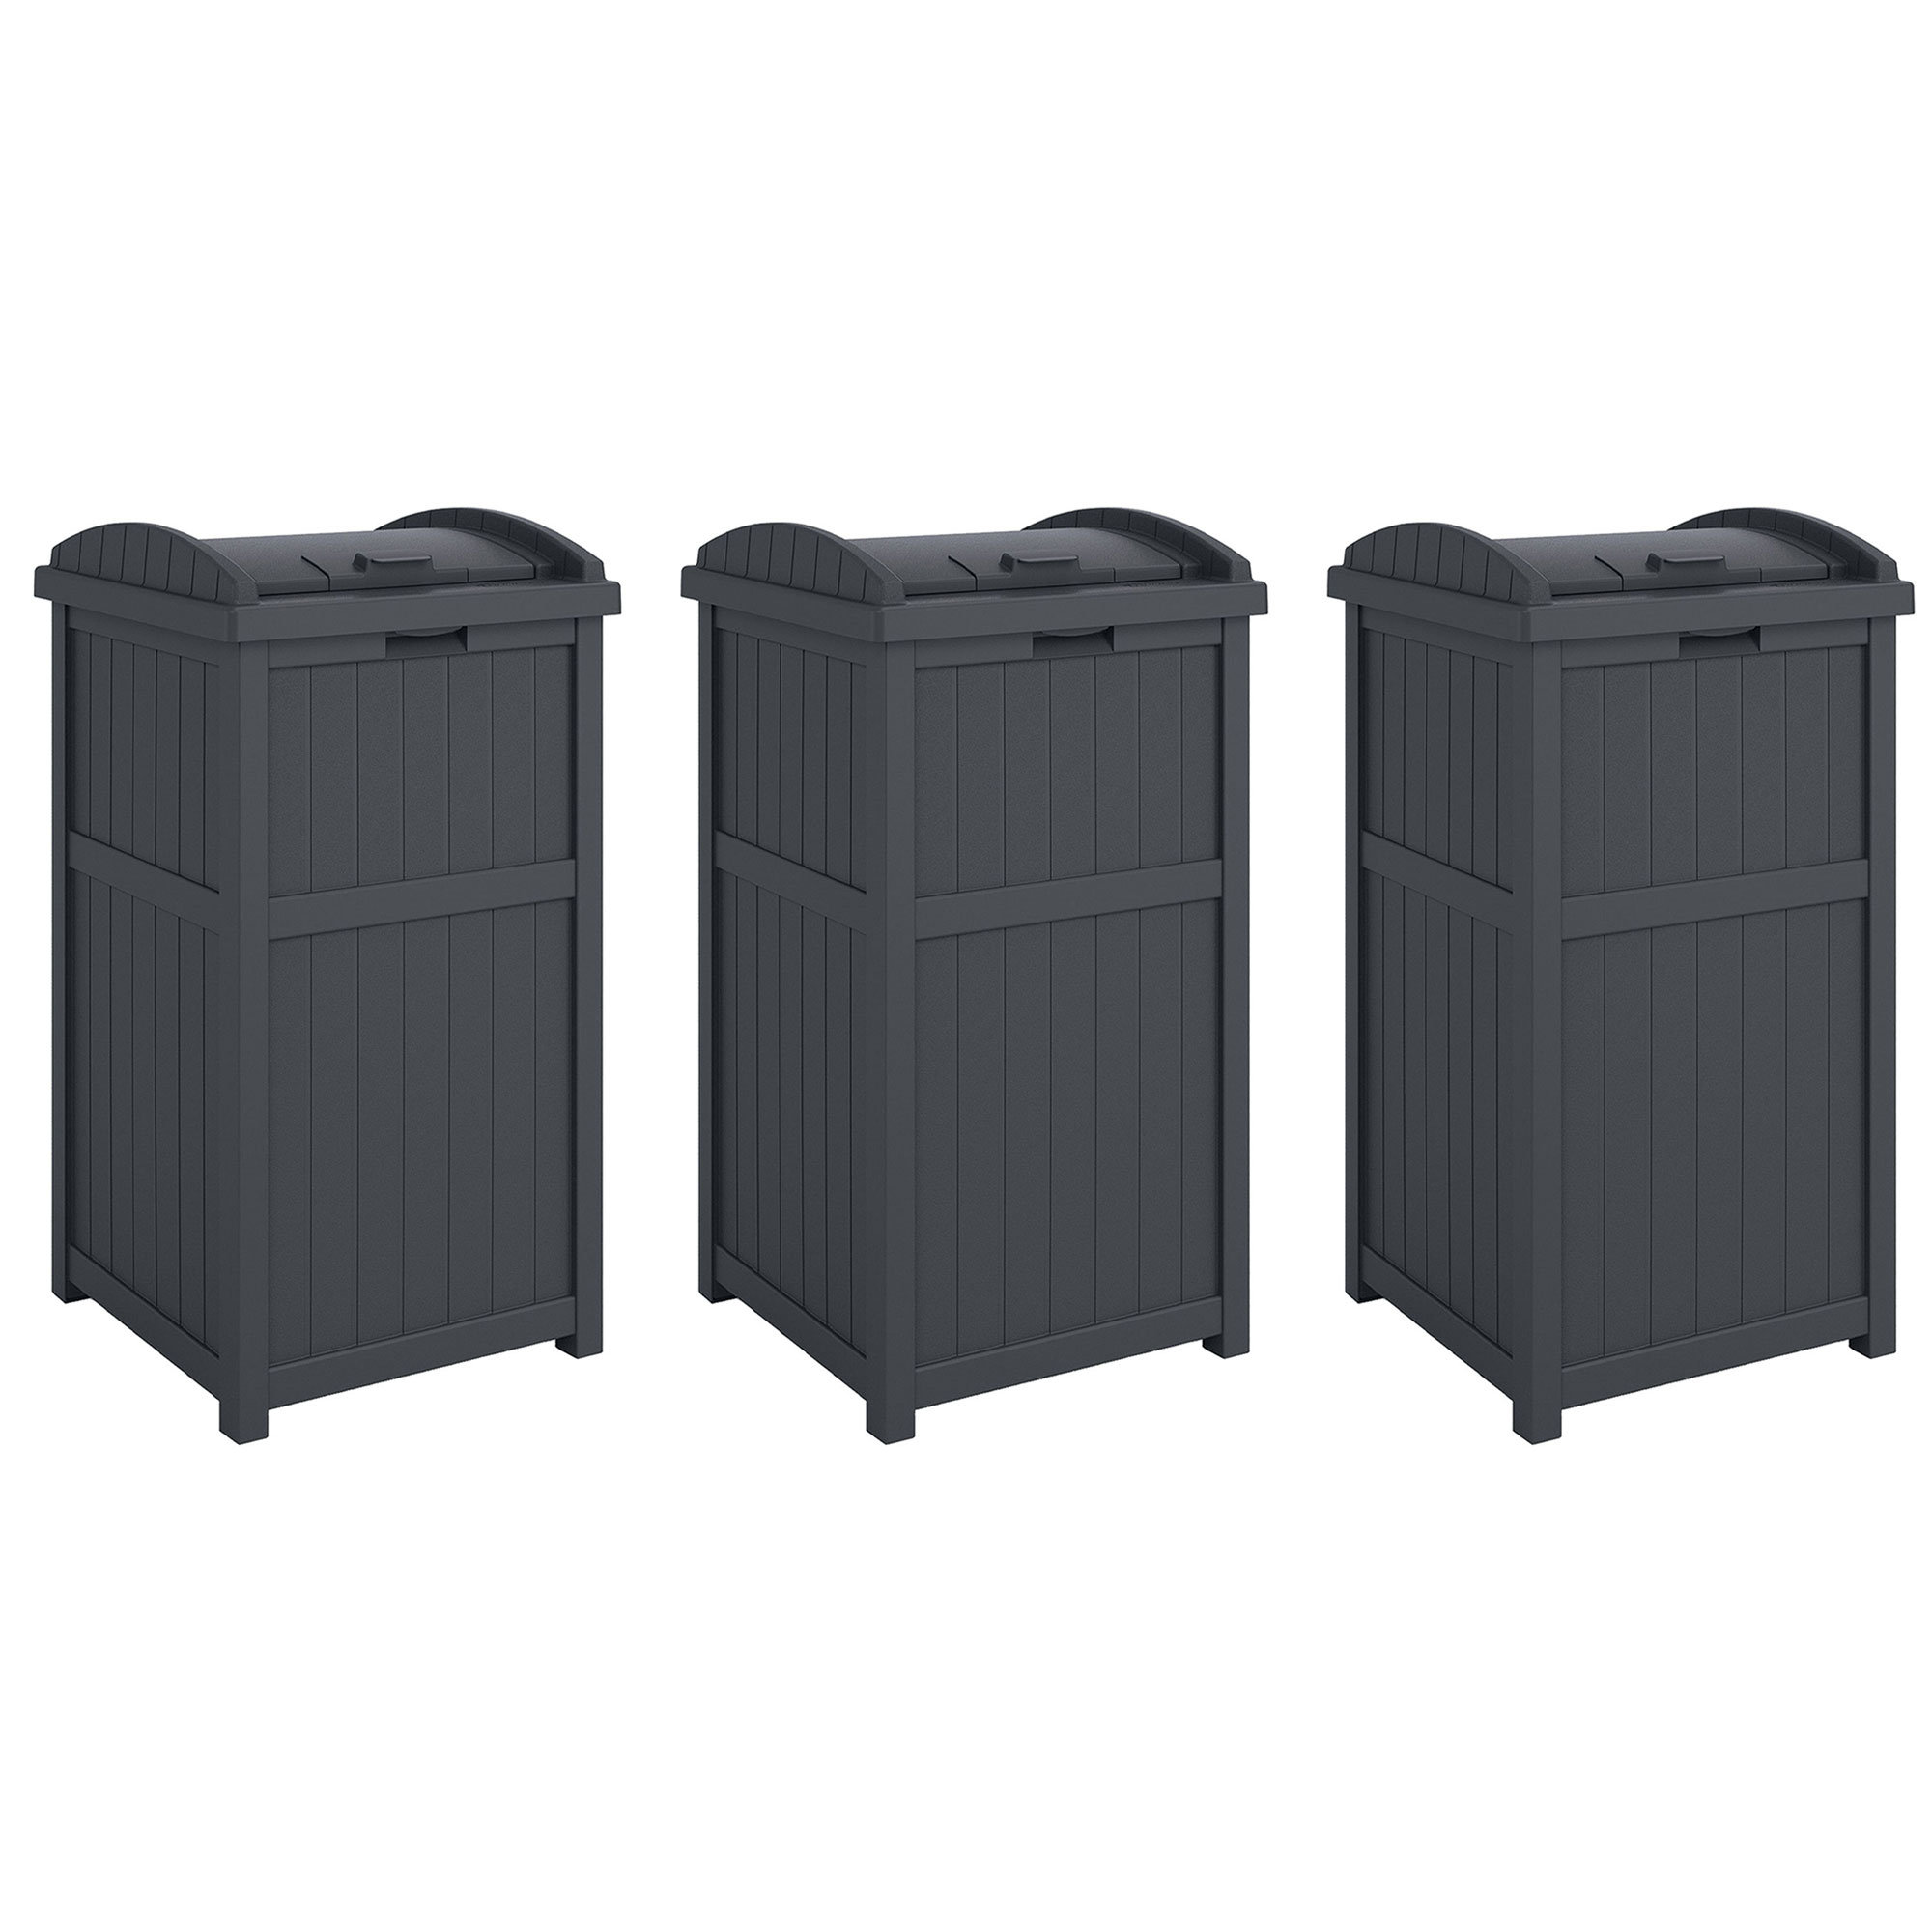 Suncast Hideaway Rectangular 33 Gallon Trash Can With Secure Lid